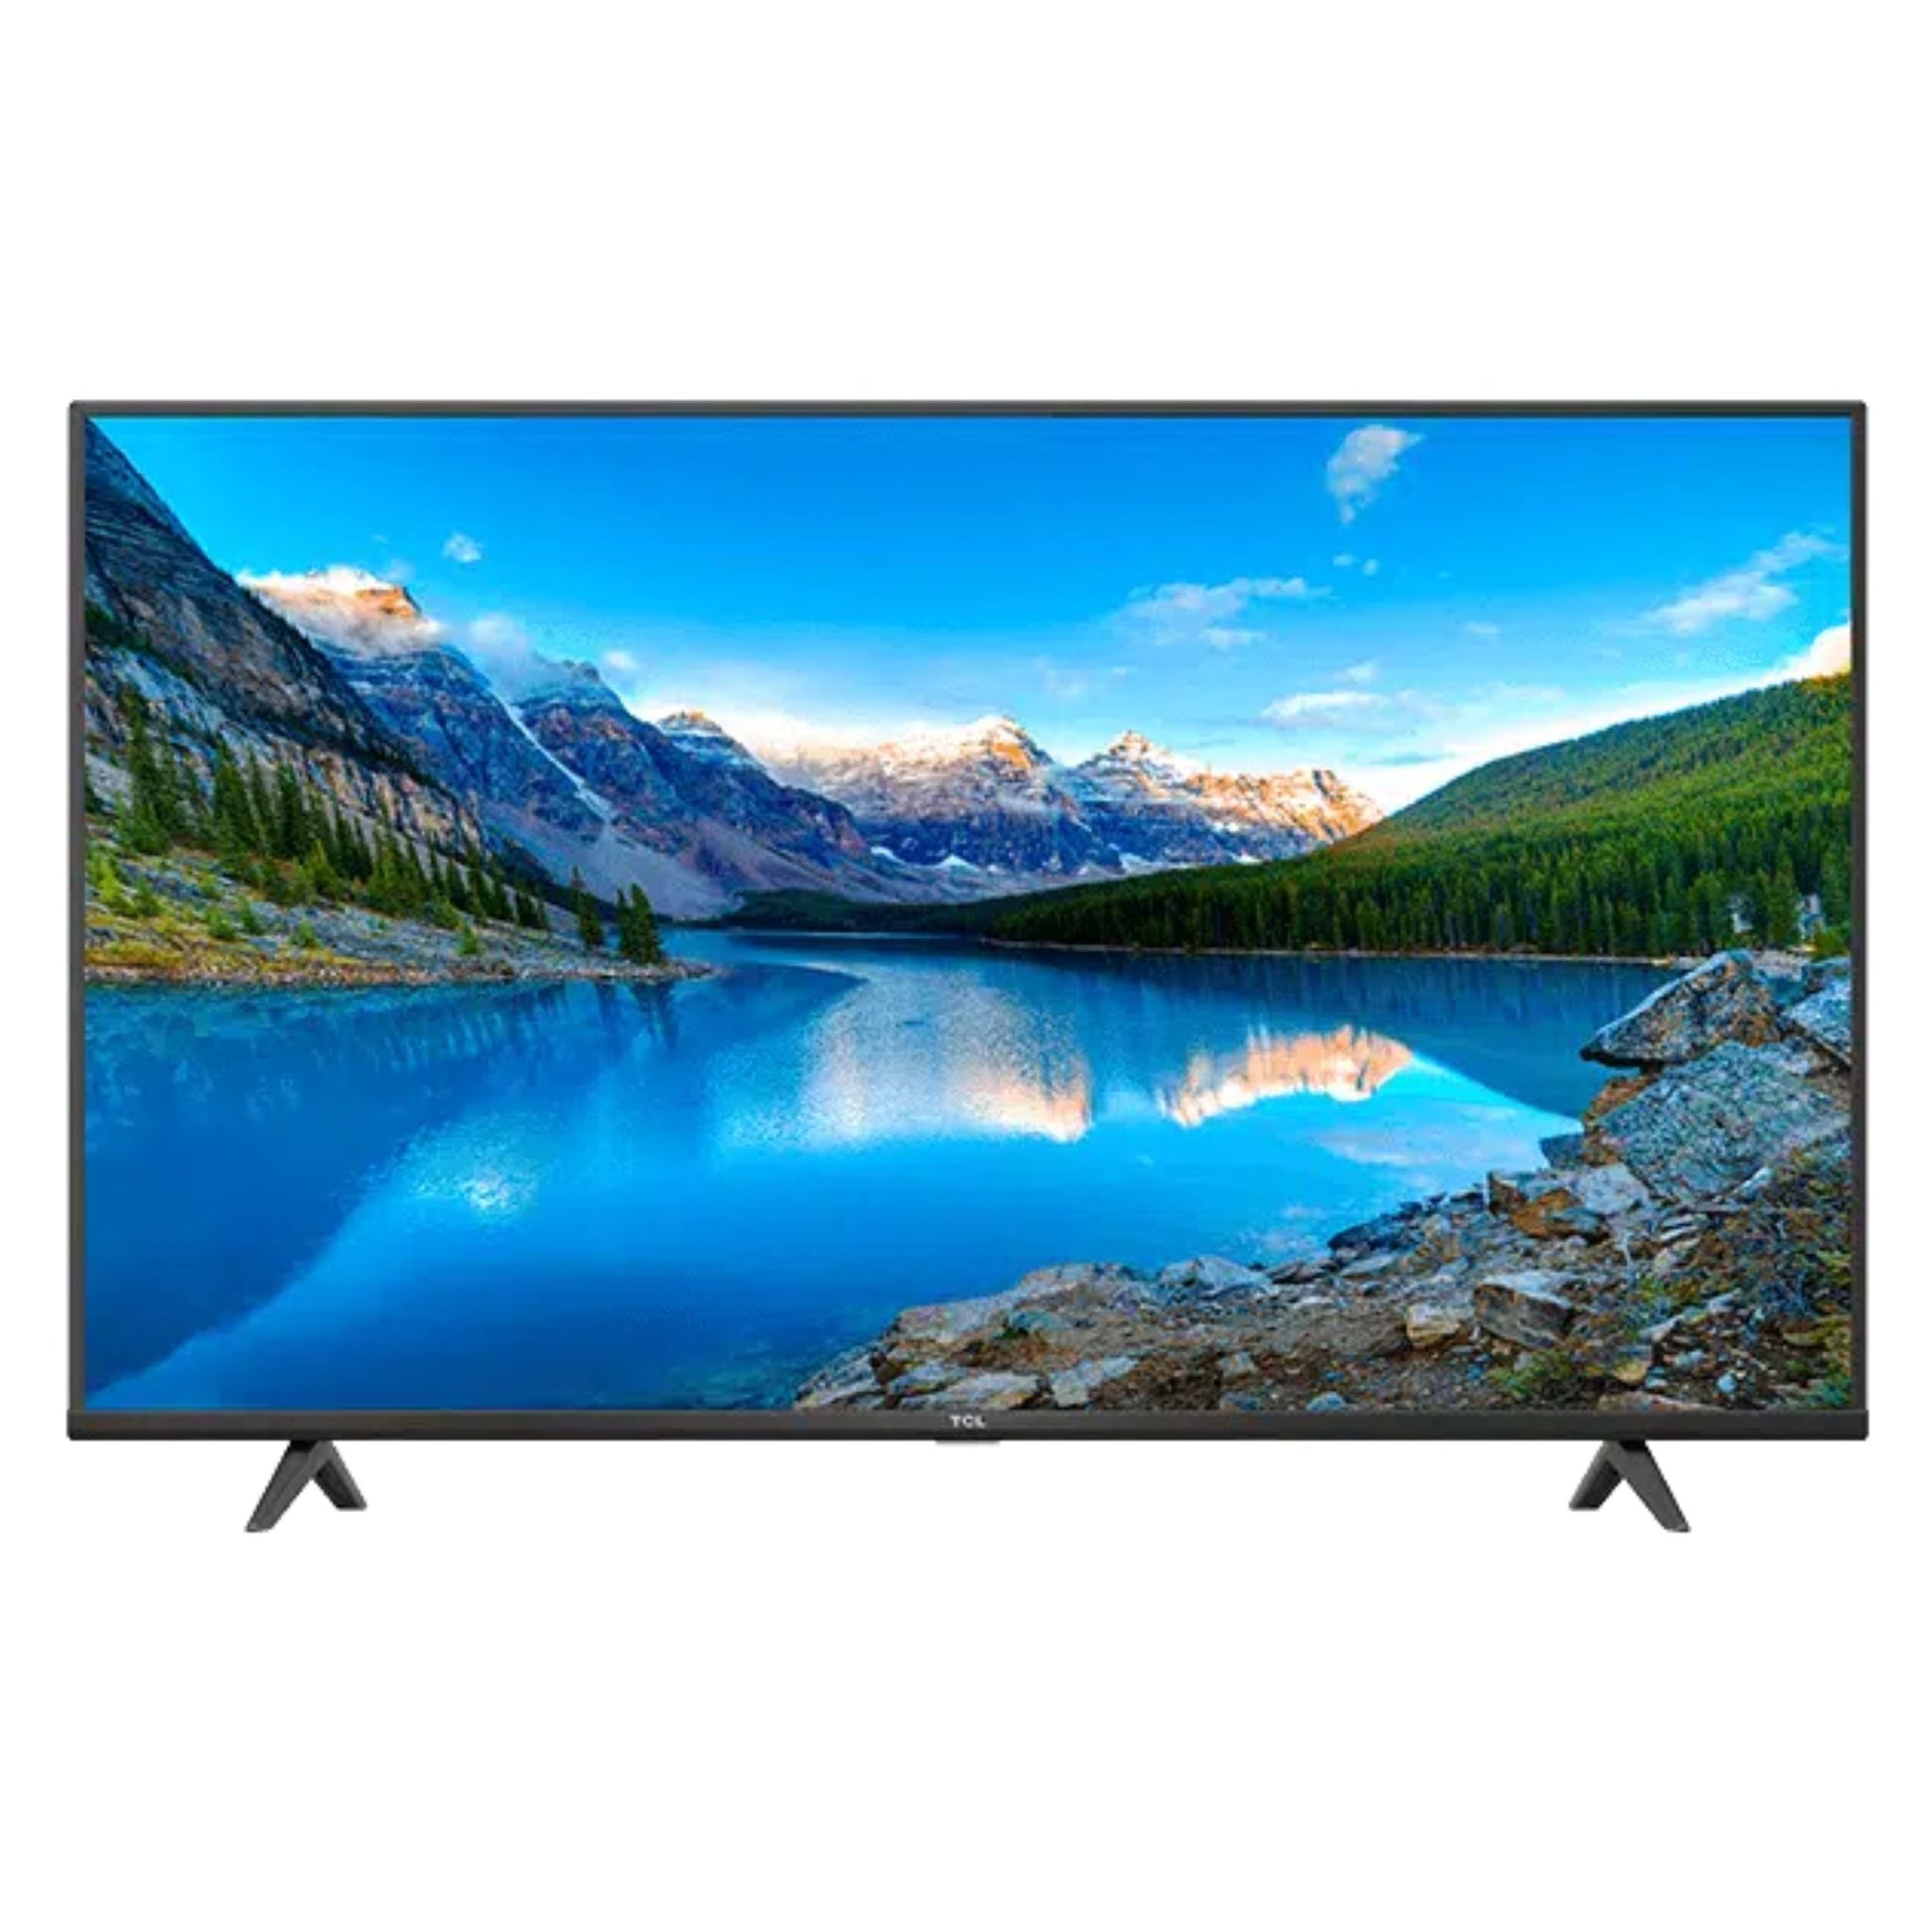 TCL 65 inch Smart TV, 65P4US